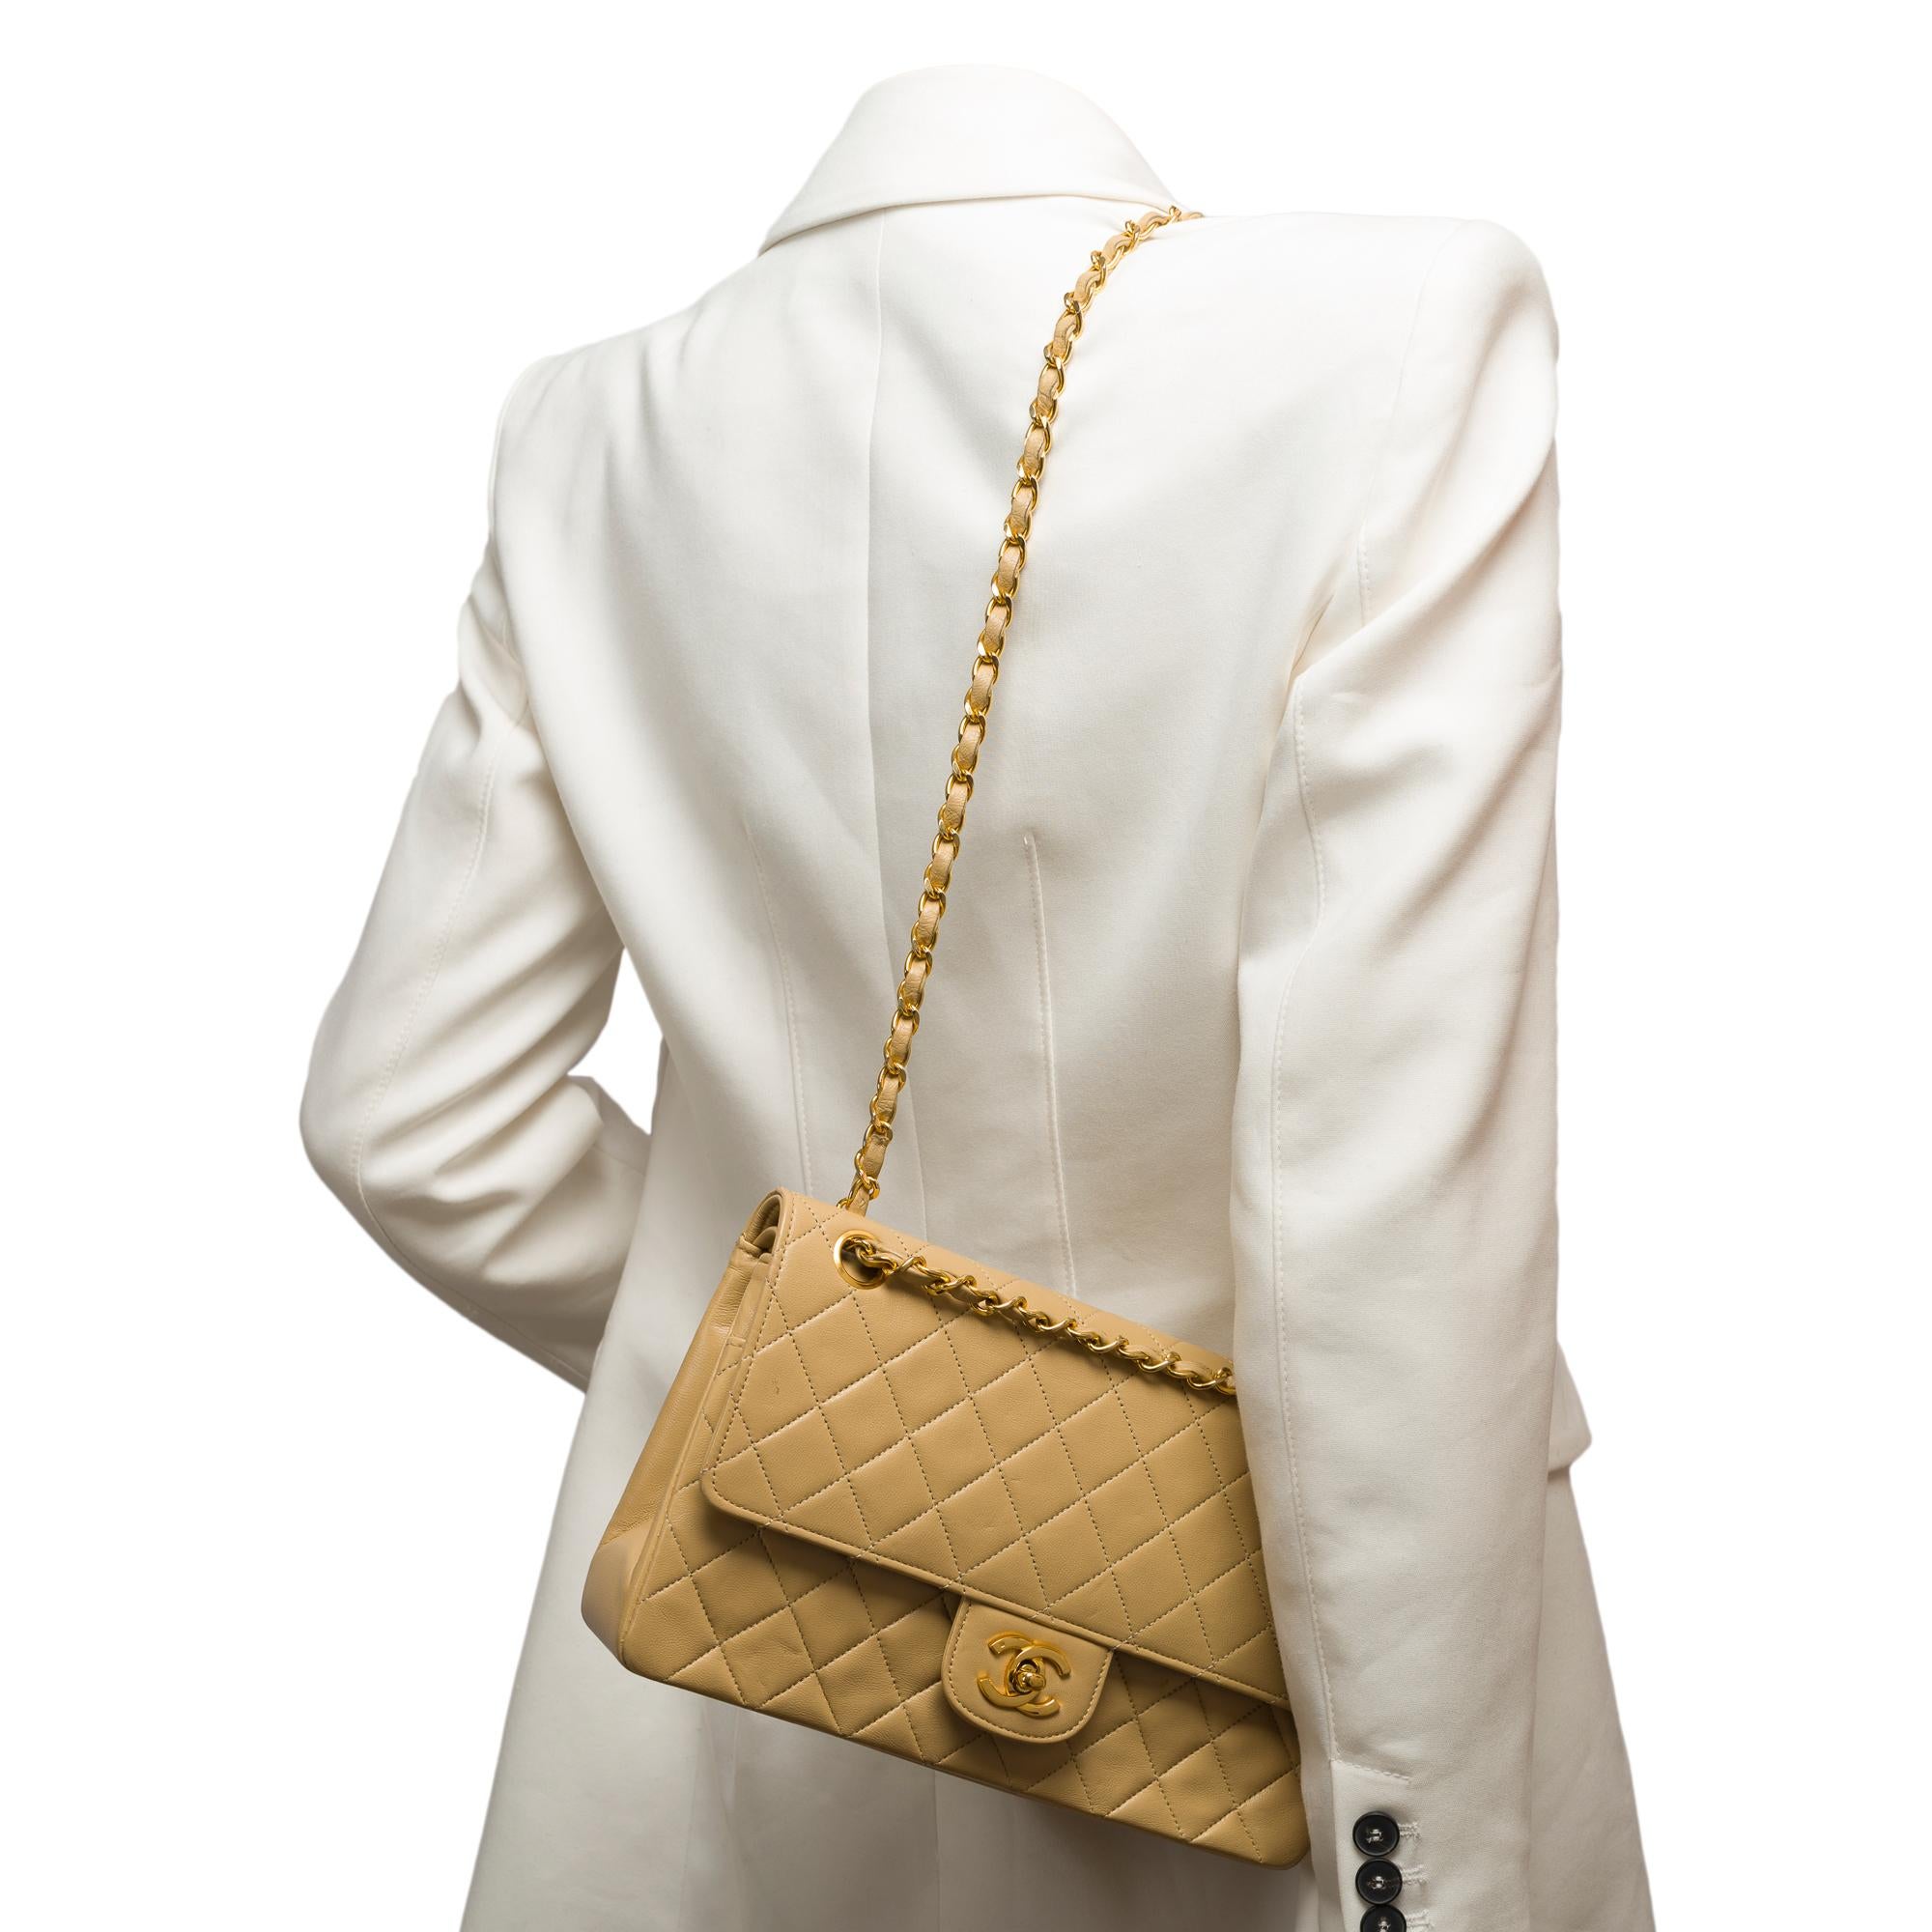 Chanel Timeless double flap shoulder bag in beige quilted lambskin leather, GHW For Sale 8